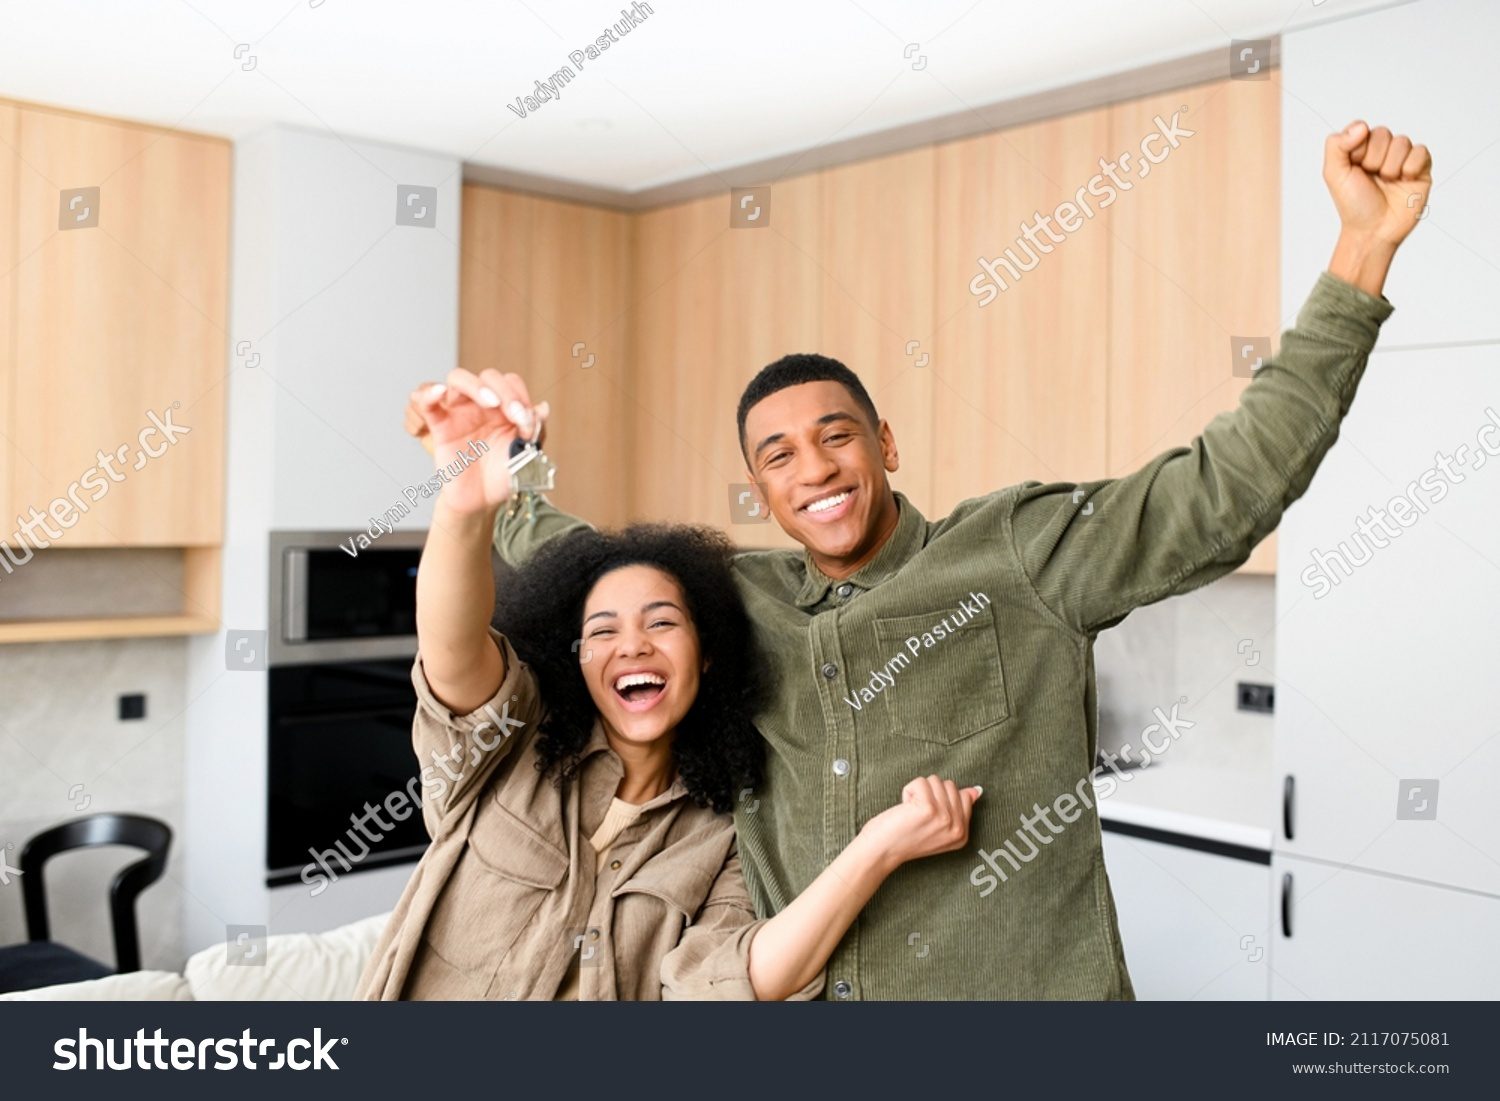 Stock Photo Multiracial Couple In Love Hugging In A New Home While Holding Keys In Hands Young Multiracial 2117075081